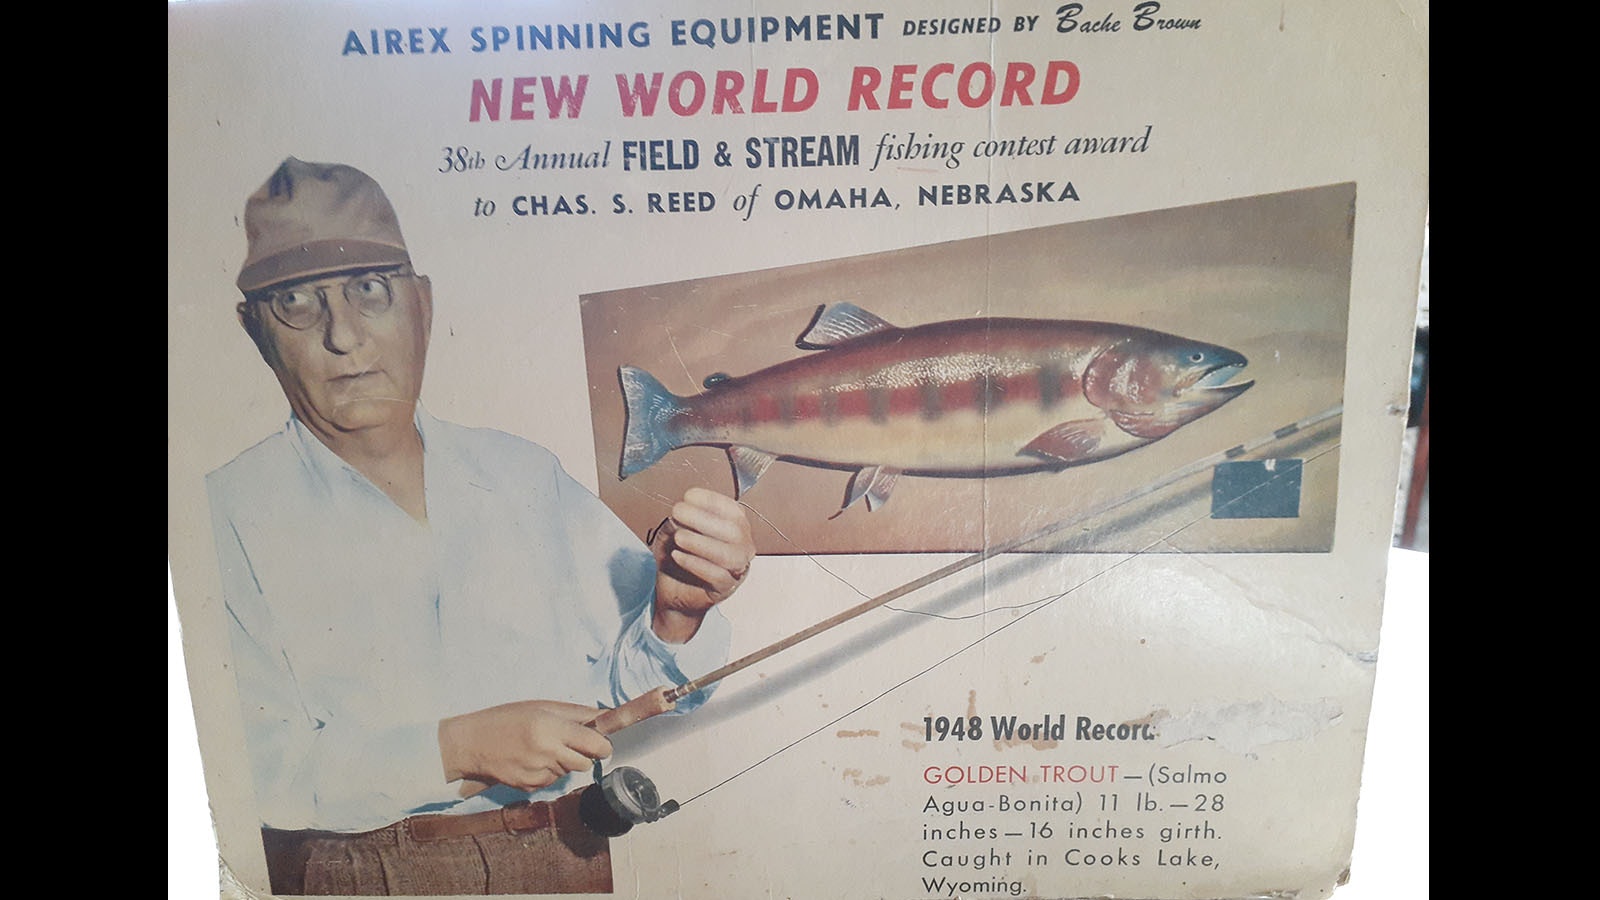 This image from Field & Stream magazine proves the legitimacy of Wyoming’s golden trout record, according to JoAn Neumayer, who said she was there when the fish was caught in 1948 by a client of her father, who was a fishing guide.